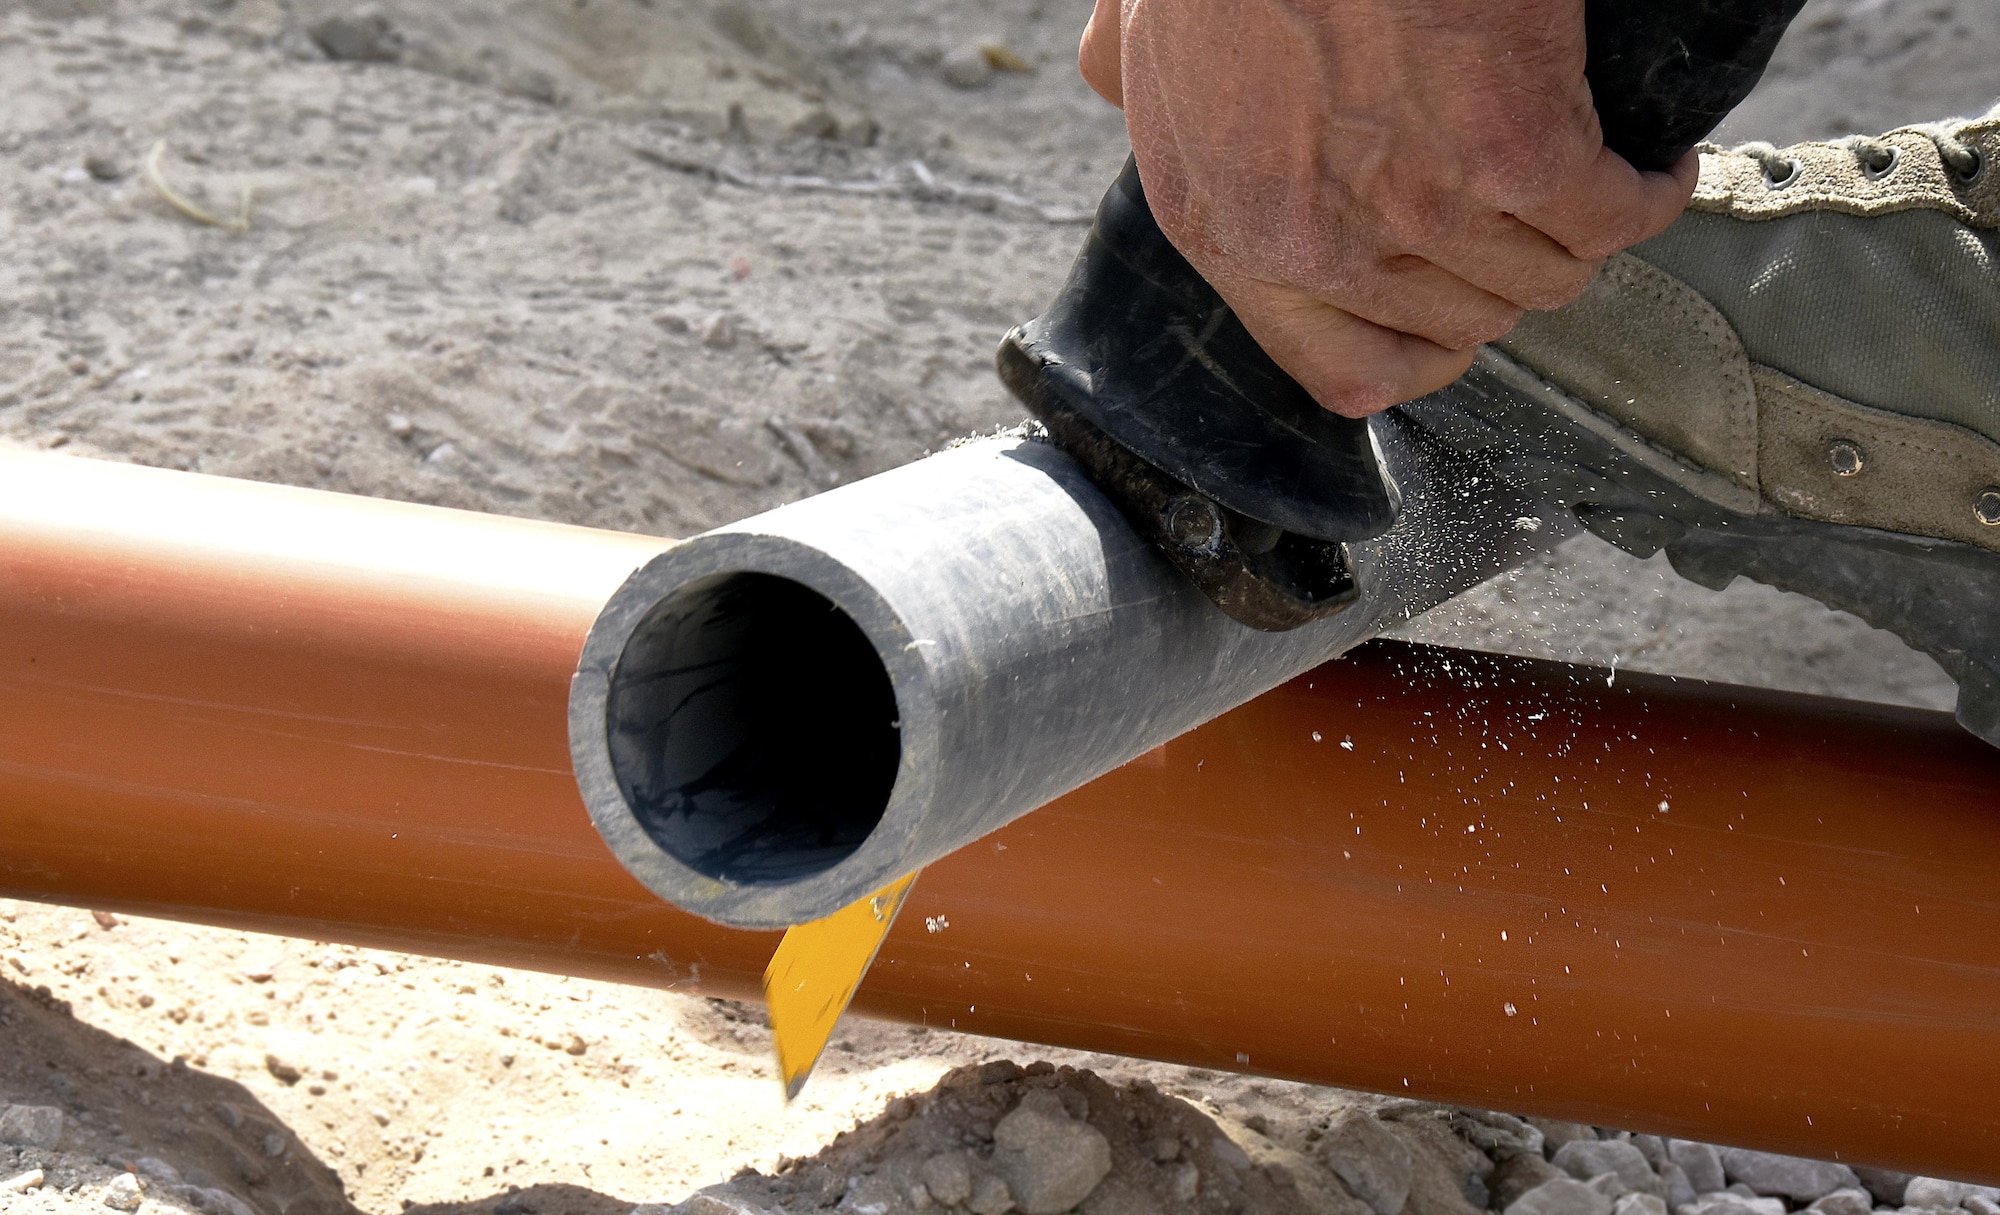 An Airmen with the 379th Expeditionary Civil Engineer Squadron Water and Fuels Section cuts a pipe at Al Udeid Air Base, Qatar, March 17, 2017. Airmen with the 379th ECES Water and Fuels Section have played a major role in the 379th ECES cadillac trailer plan, one part of the continued improvement of facilities on Al Udeid AB. (U.S. Air Force photo by Senior Airman Cynthia A. Innocenti)